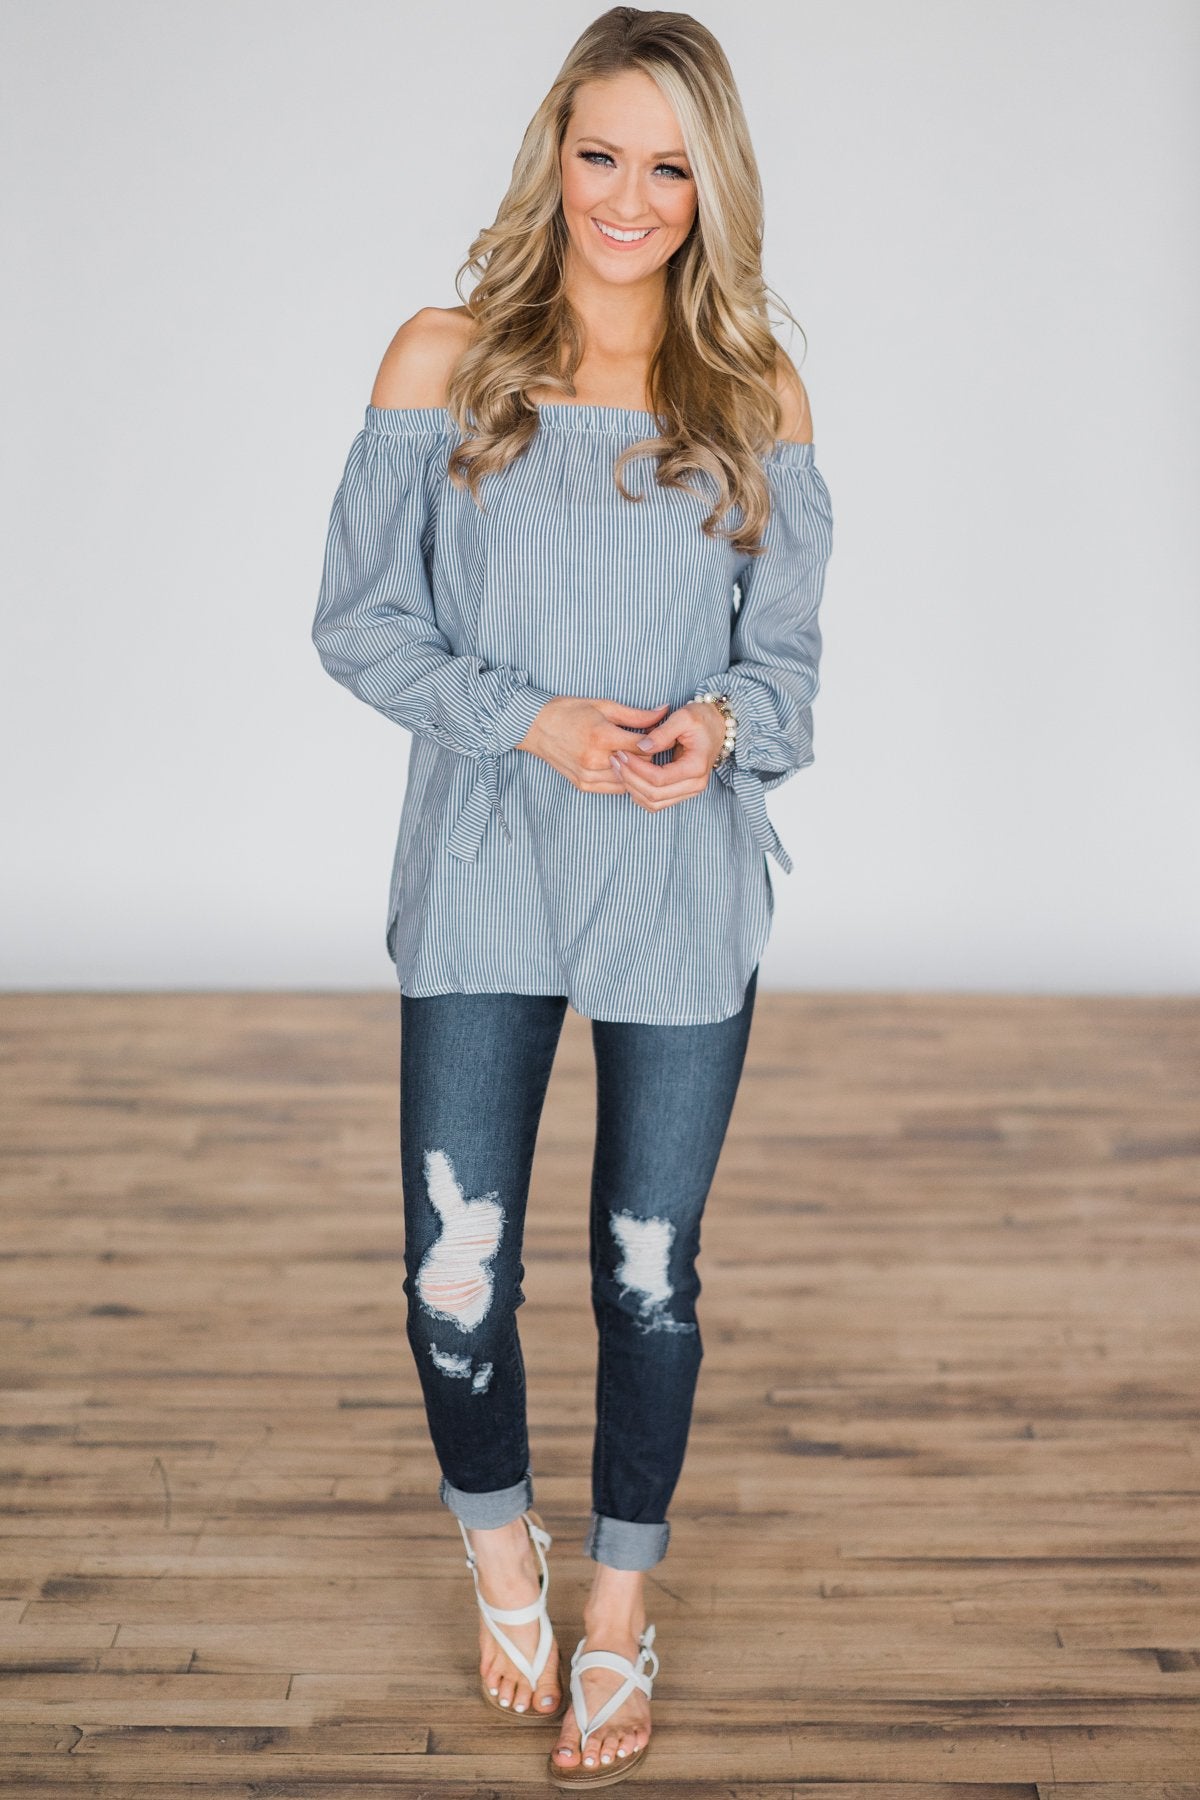 Southern Romance Off the Shoulder Top